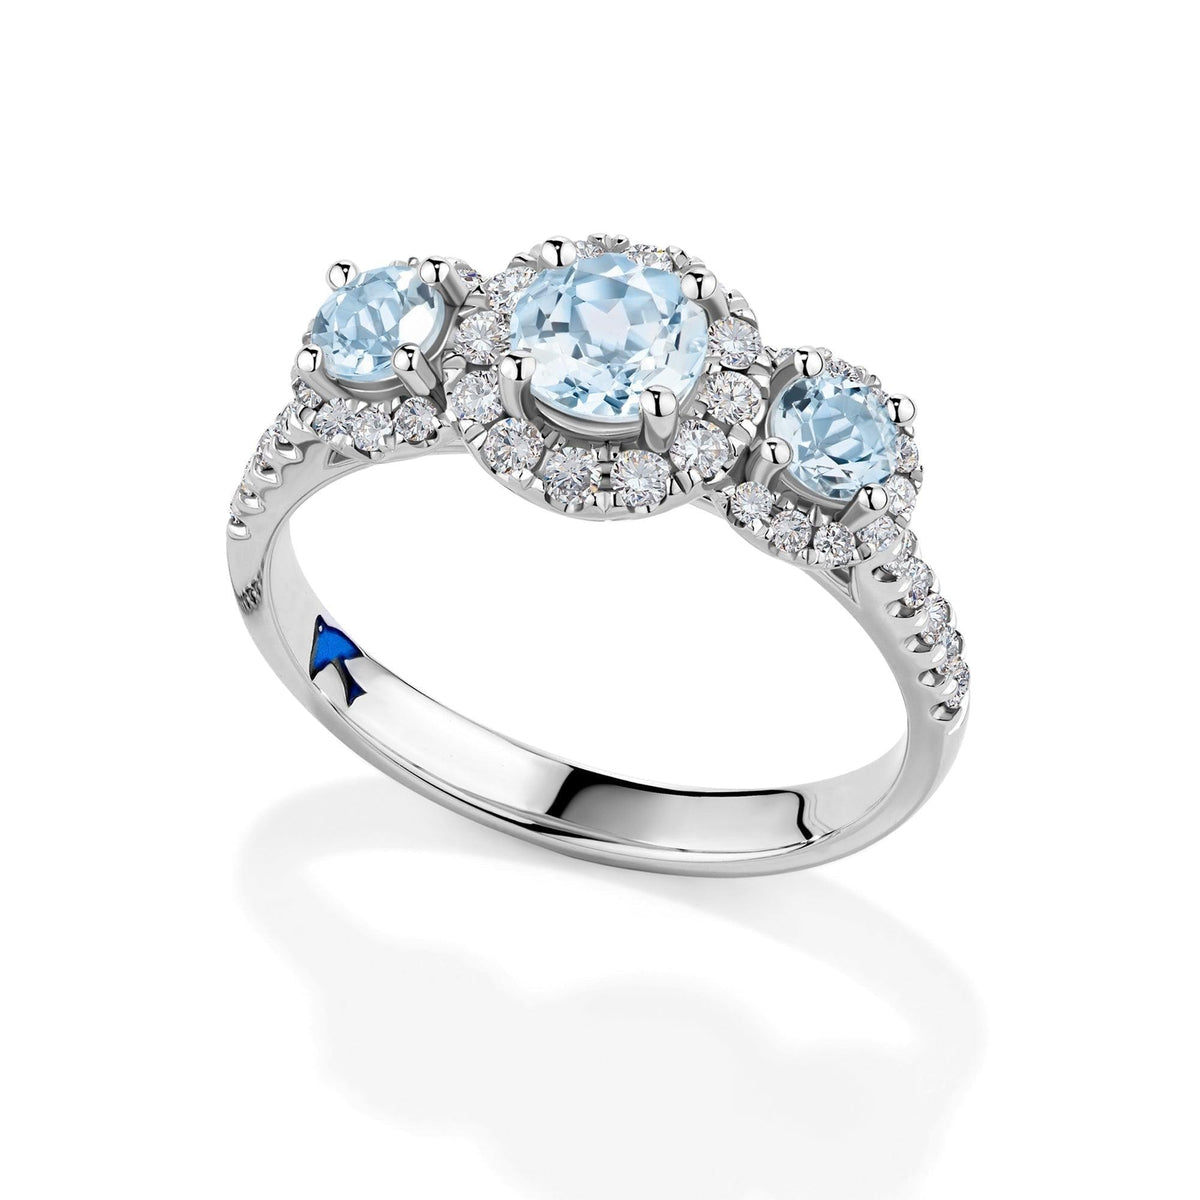 Bluebird of Happiness® Aquamarine and Diamond Halo Trilogy Ring in 9ct White Gold